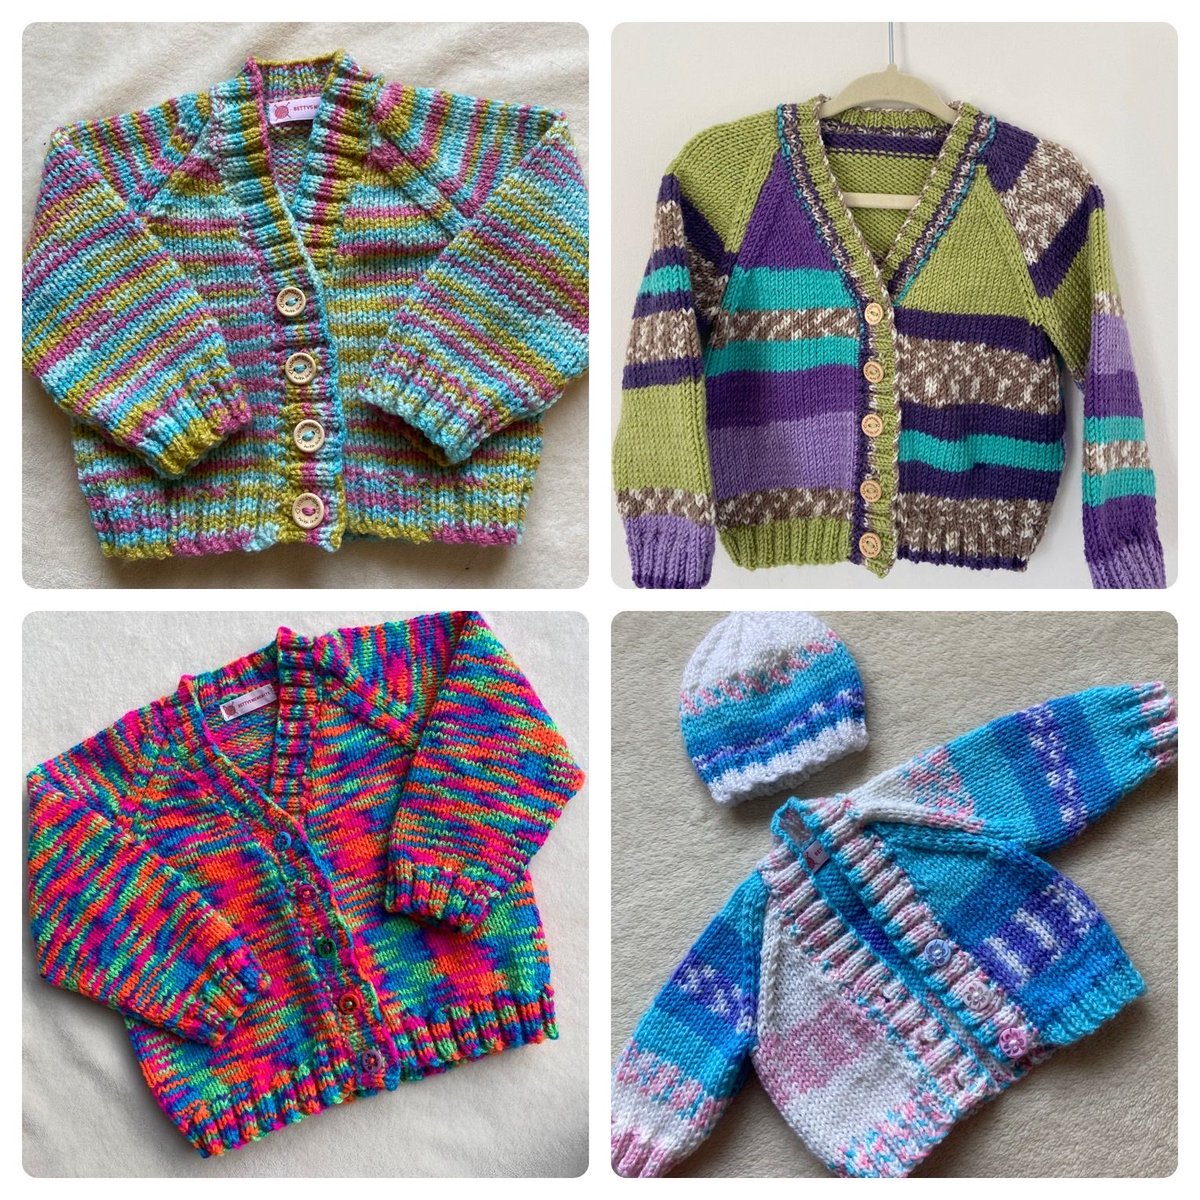 My colourful funky baby knits make unique gift ideas for any new arrival 🌈🧶👶🏻 Have a browse in my shop for sizes from premature to 12 months, or have a larger size made to order. Bettysmumknits.etsy.com #UKGiftHour #ShopIndie #mhhsbd